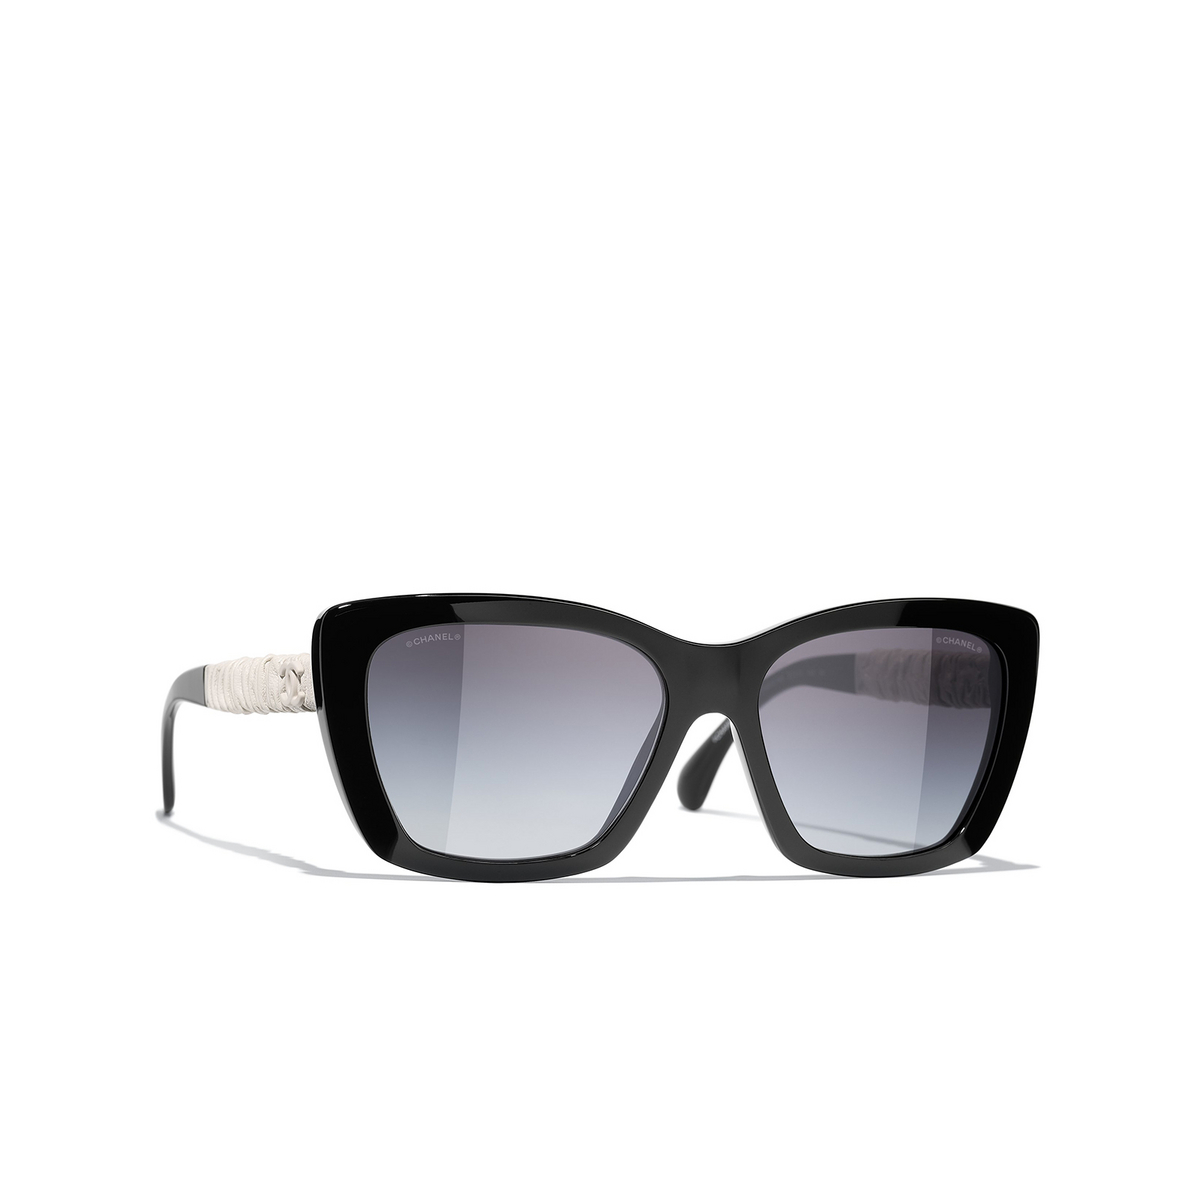 CHANEL butterfly Sunglasses 1082S6 Black & White - three-quarters view